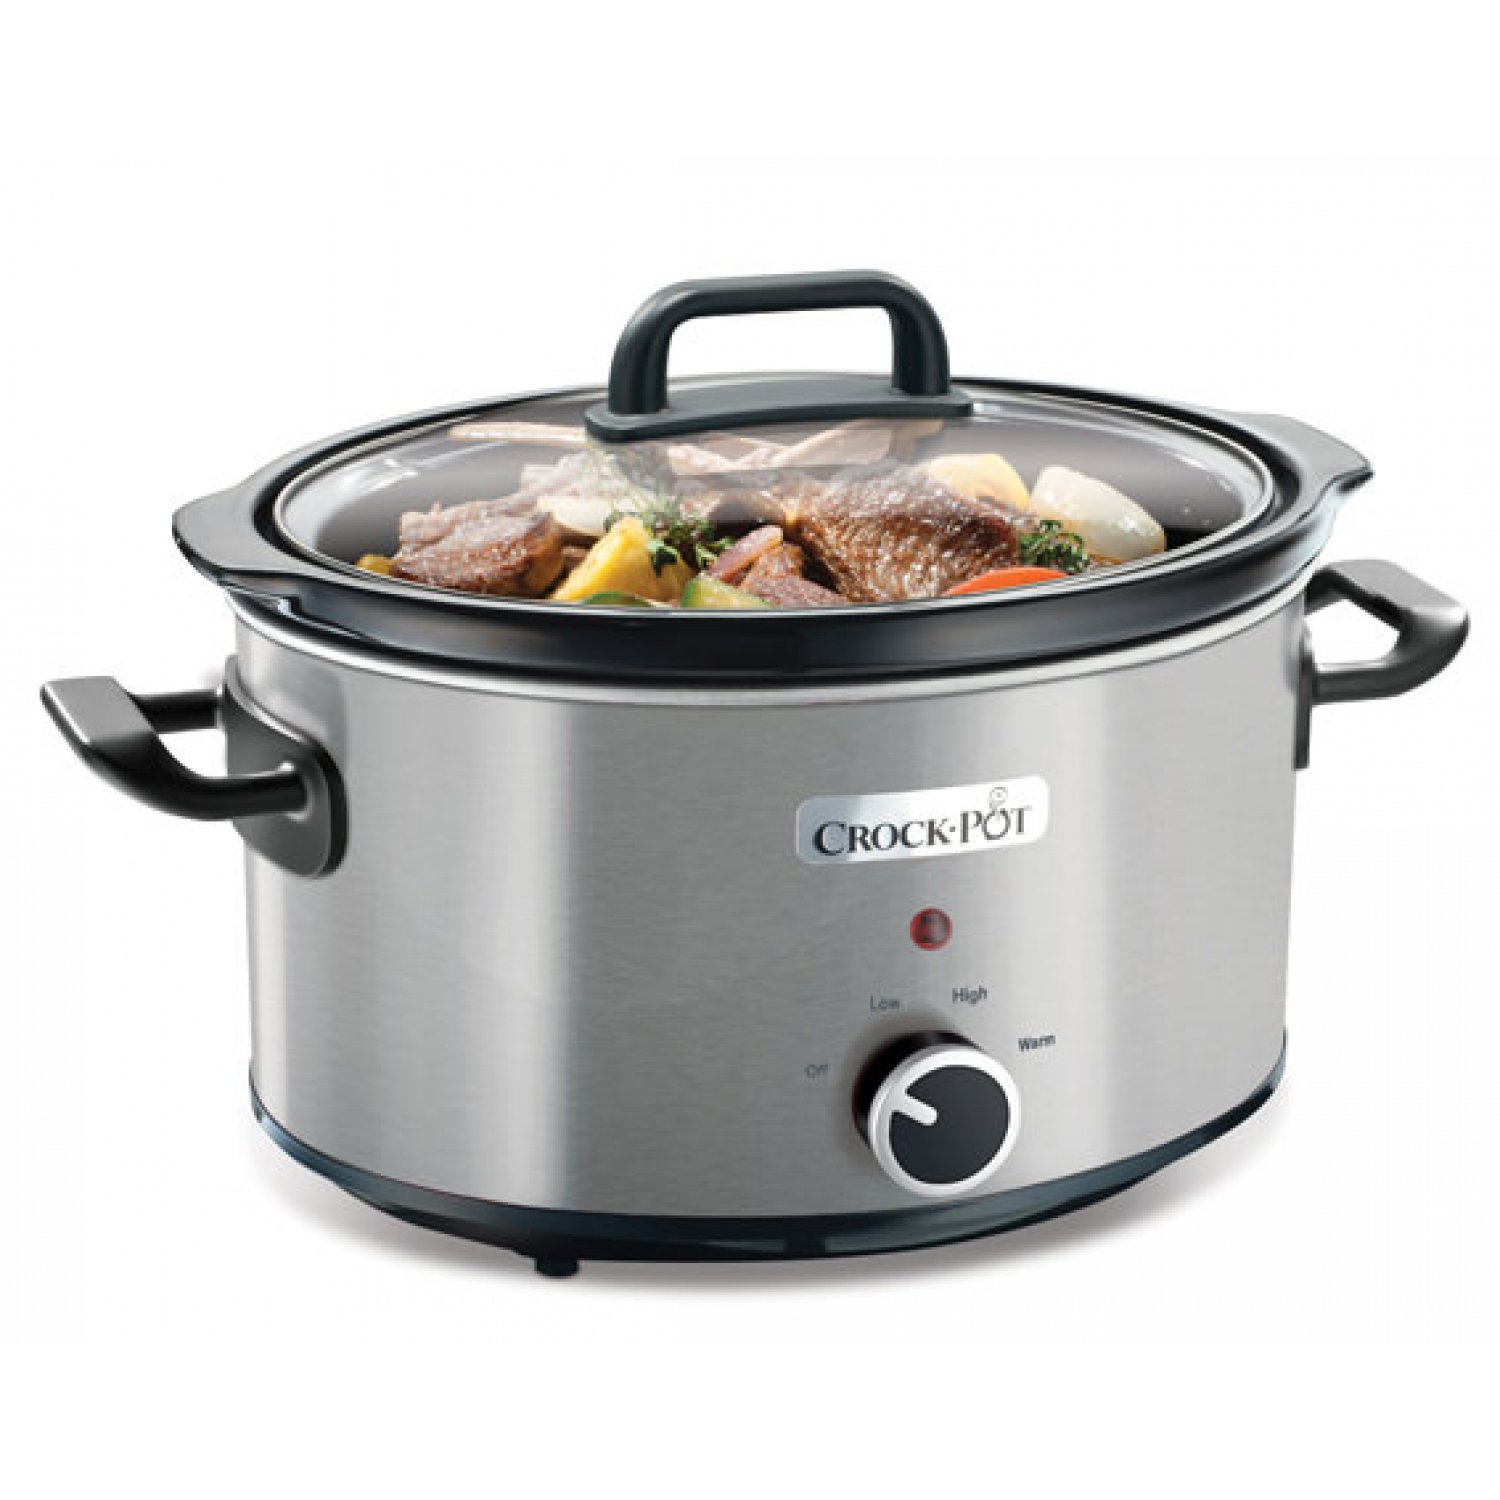 Crock-Pot Slowcooker 3.5 L stainless steel Traditional